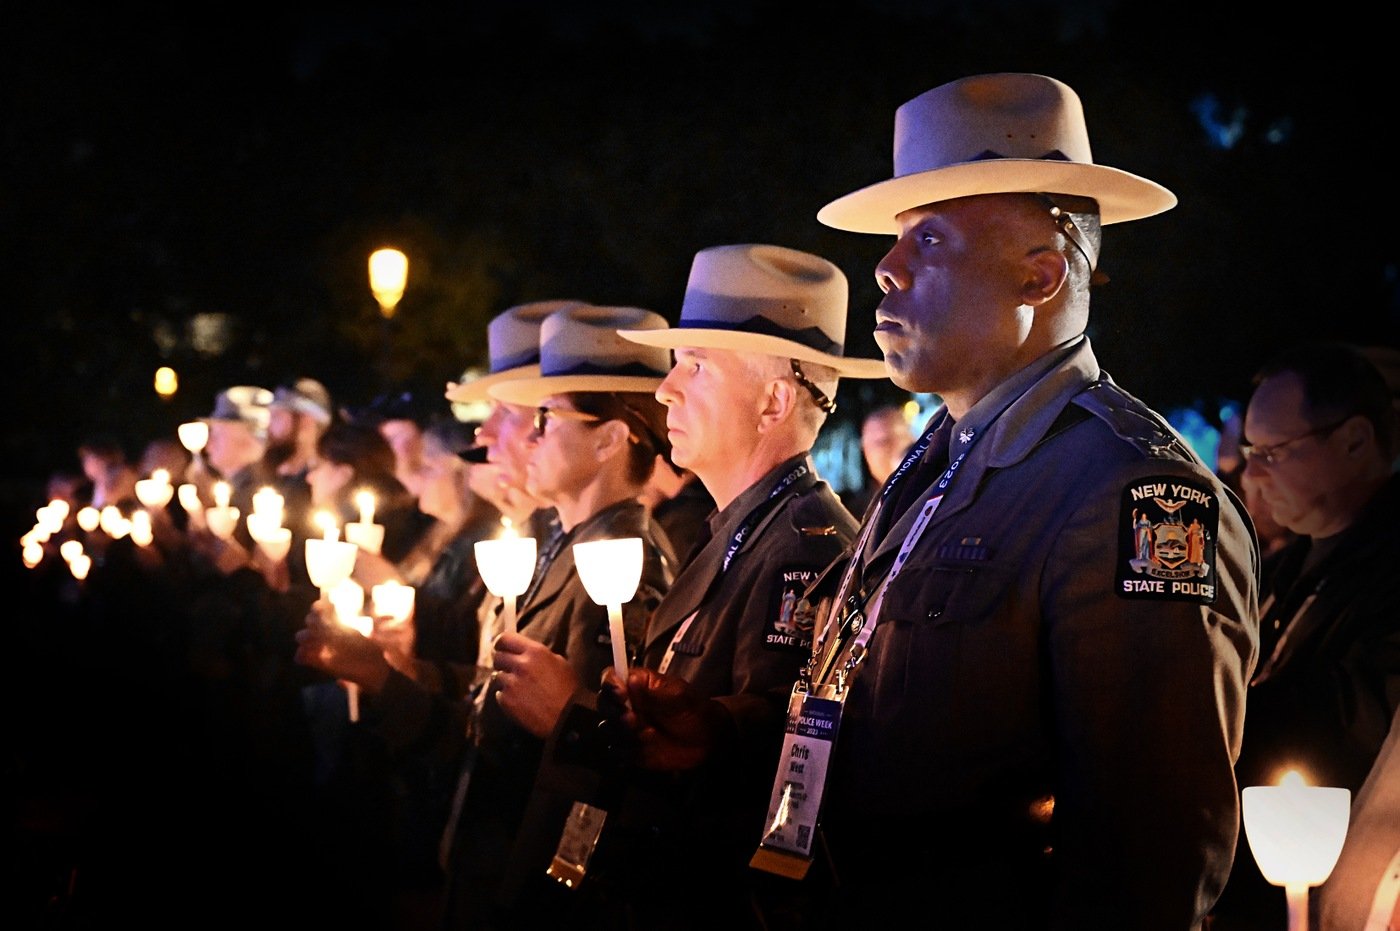 Police at candlelight vigil on the National Mall during Police Week.